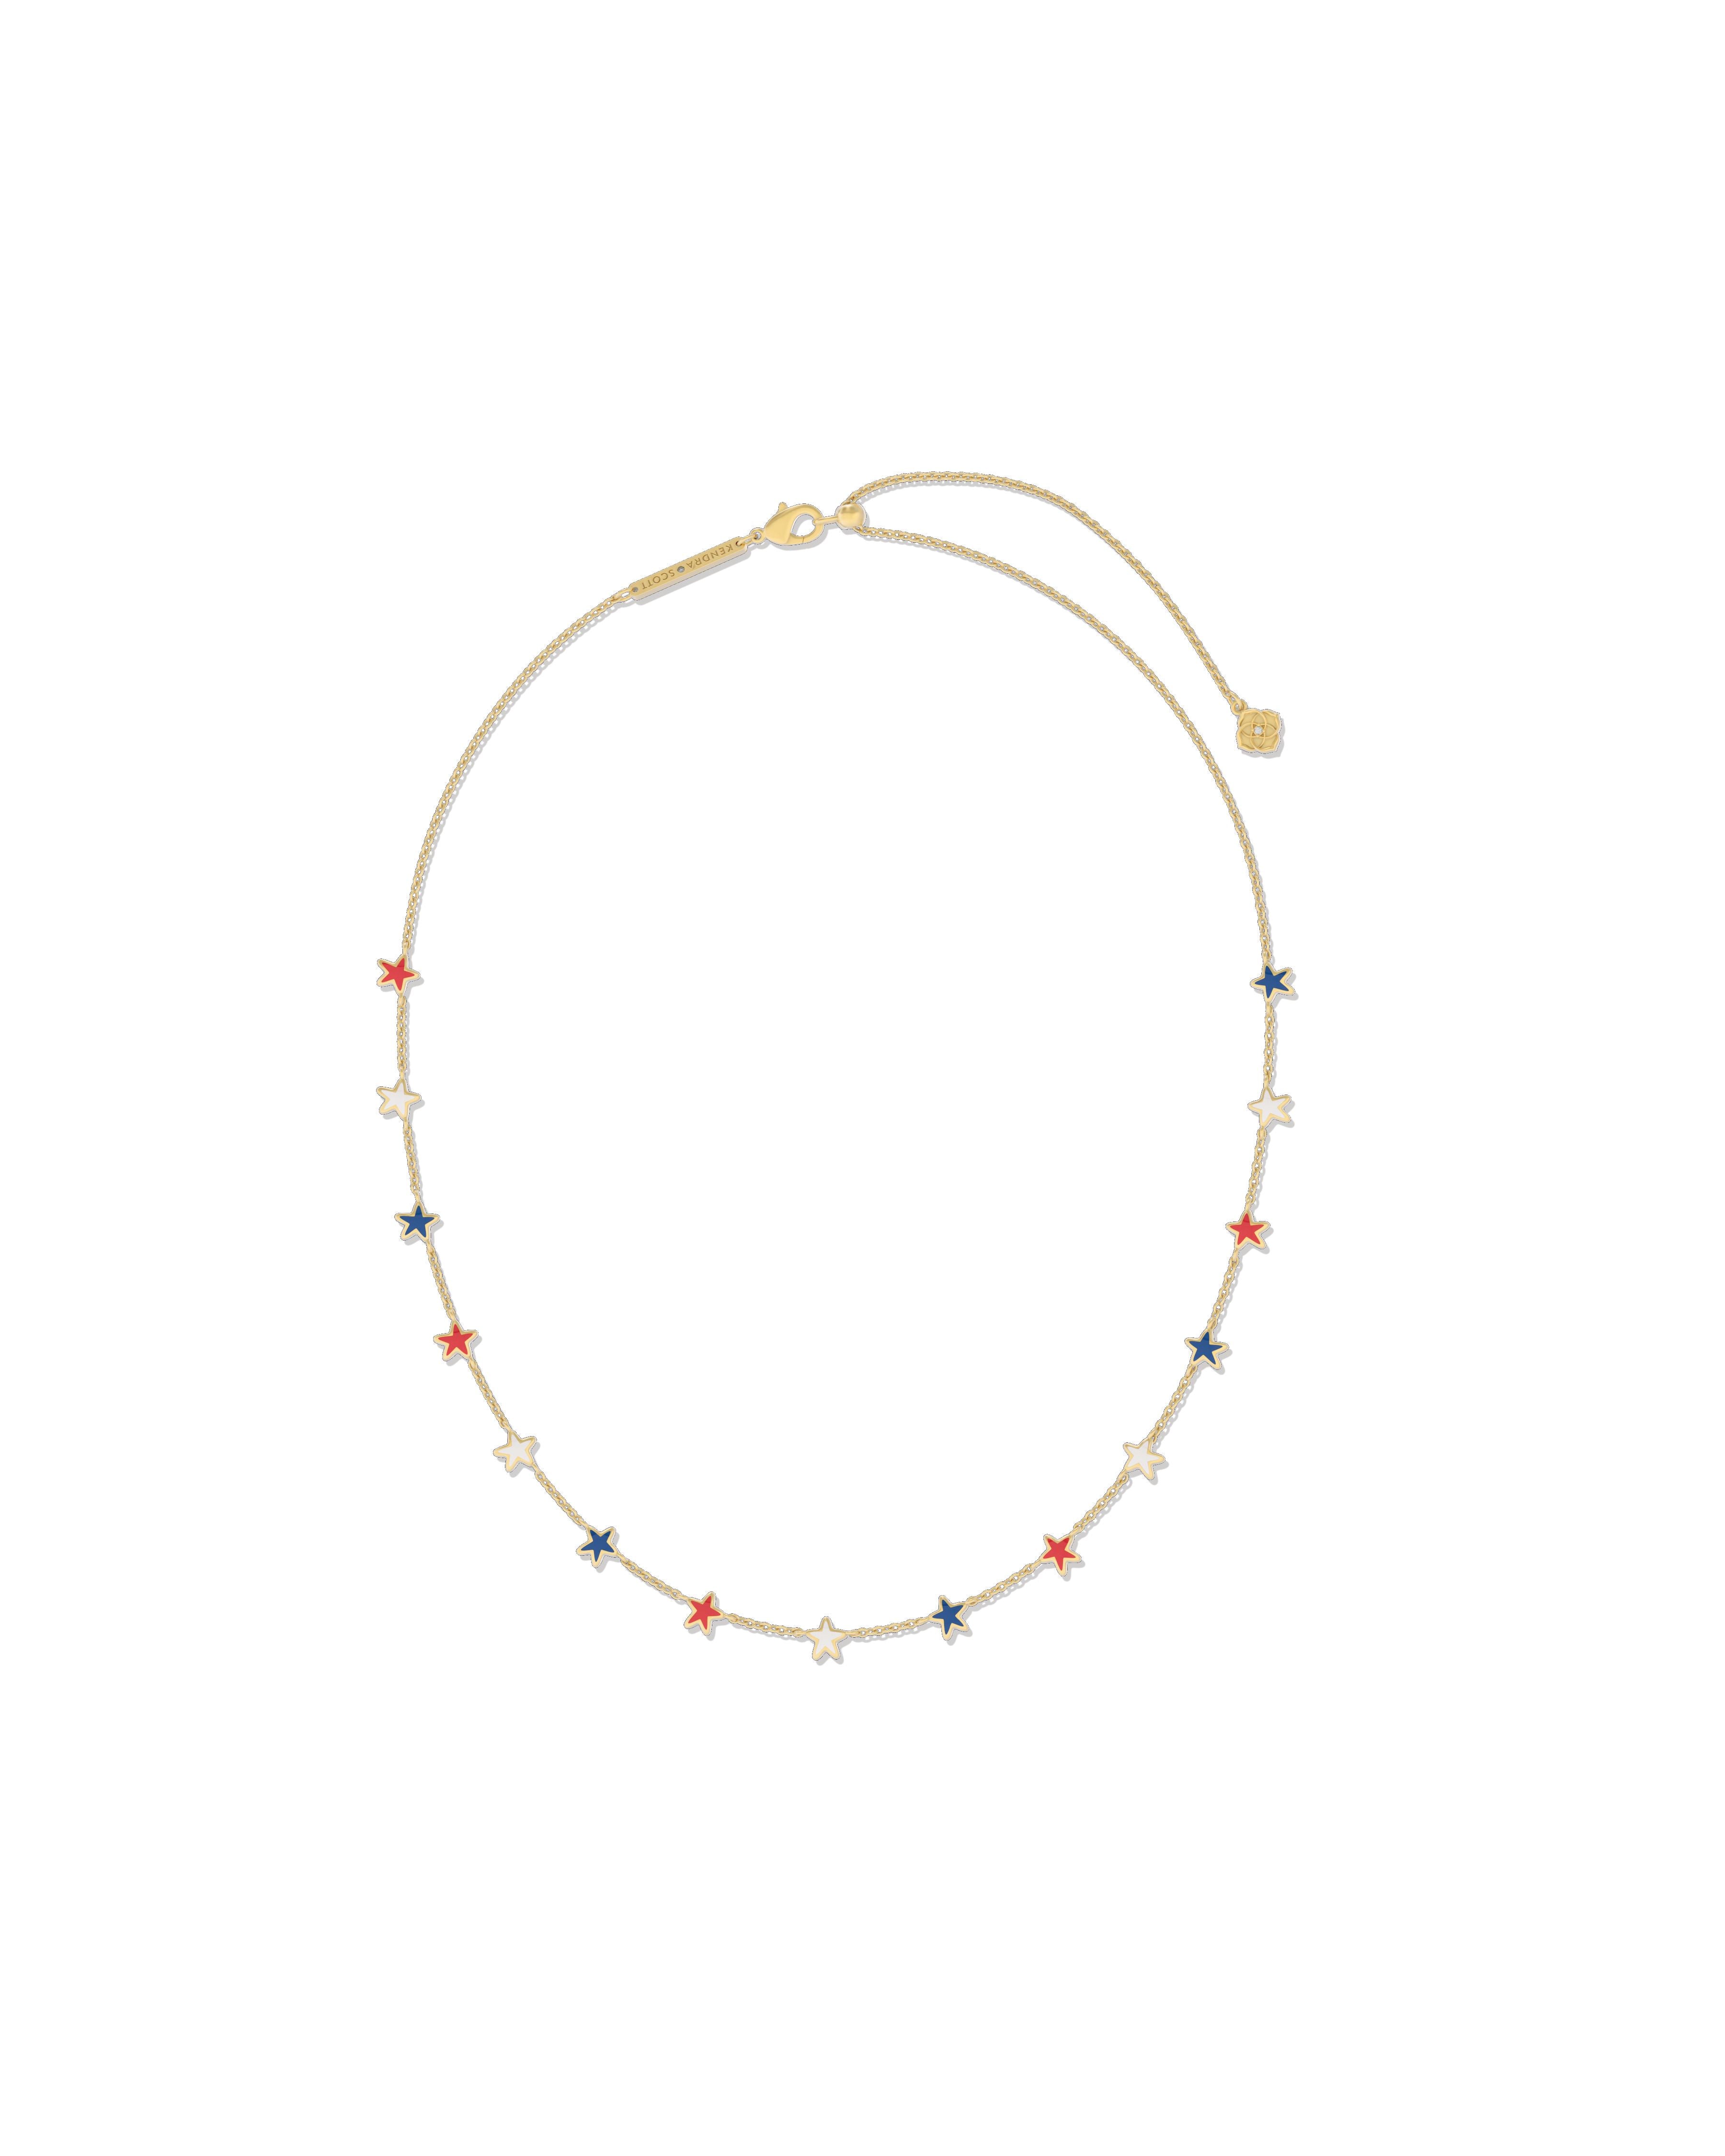 Sierra Star Strand Necklace in Gold Red White Blue Mix